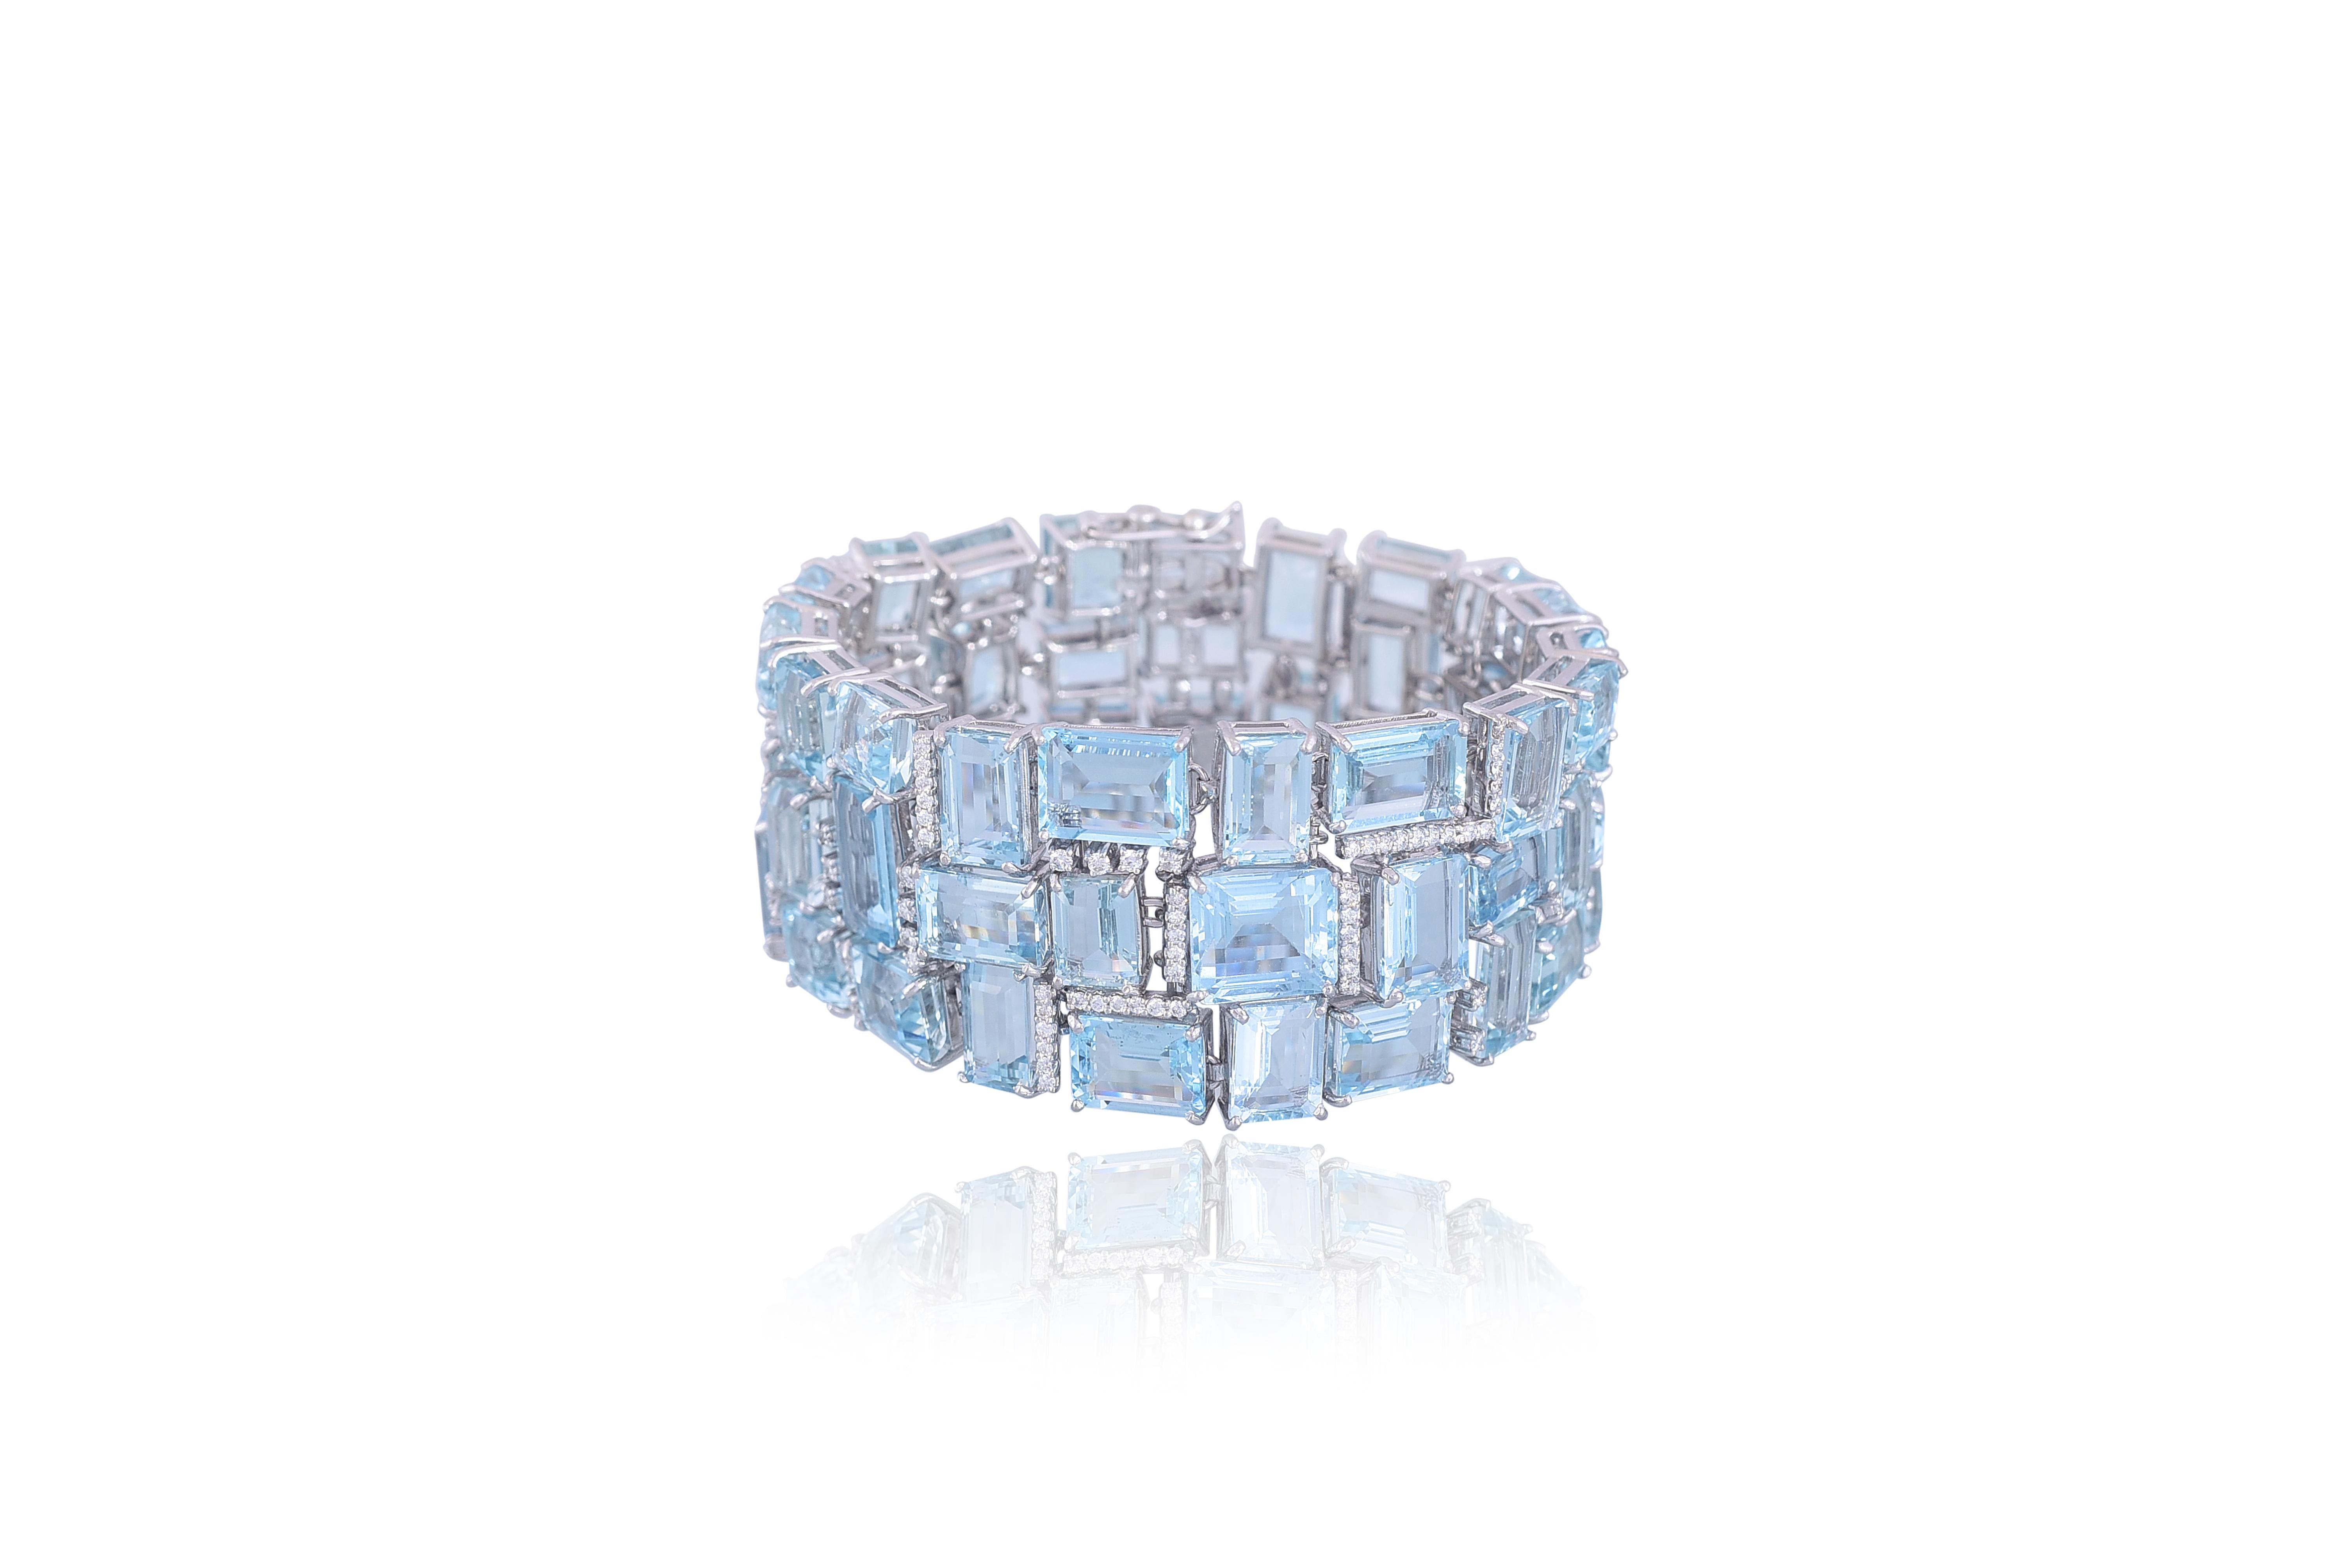 A beautiful and one of its kind Aquamarine and Diamonds convertible Bracelet / Necklace set in 18K White Gold. The Aquamarine is completely natural, without any treatment & originates from Africa. The combined weight of the Aquamarine in the